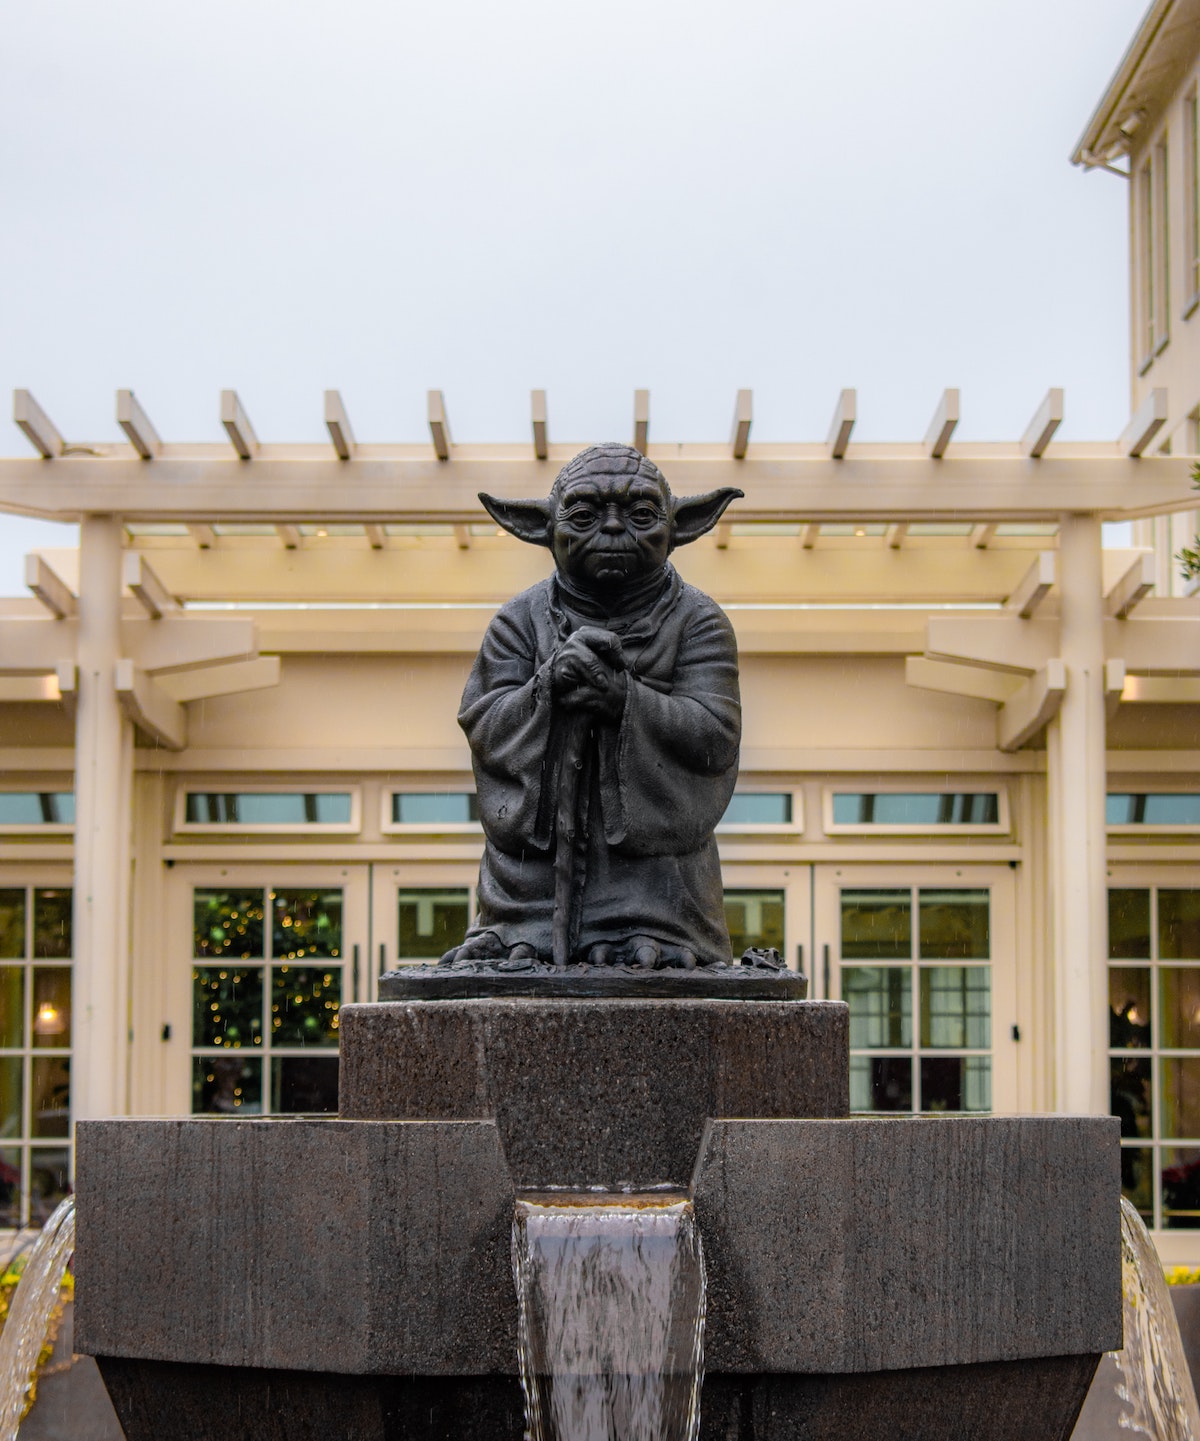 Close up of the Yoda fountain, which is free to visit in San Francisco